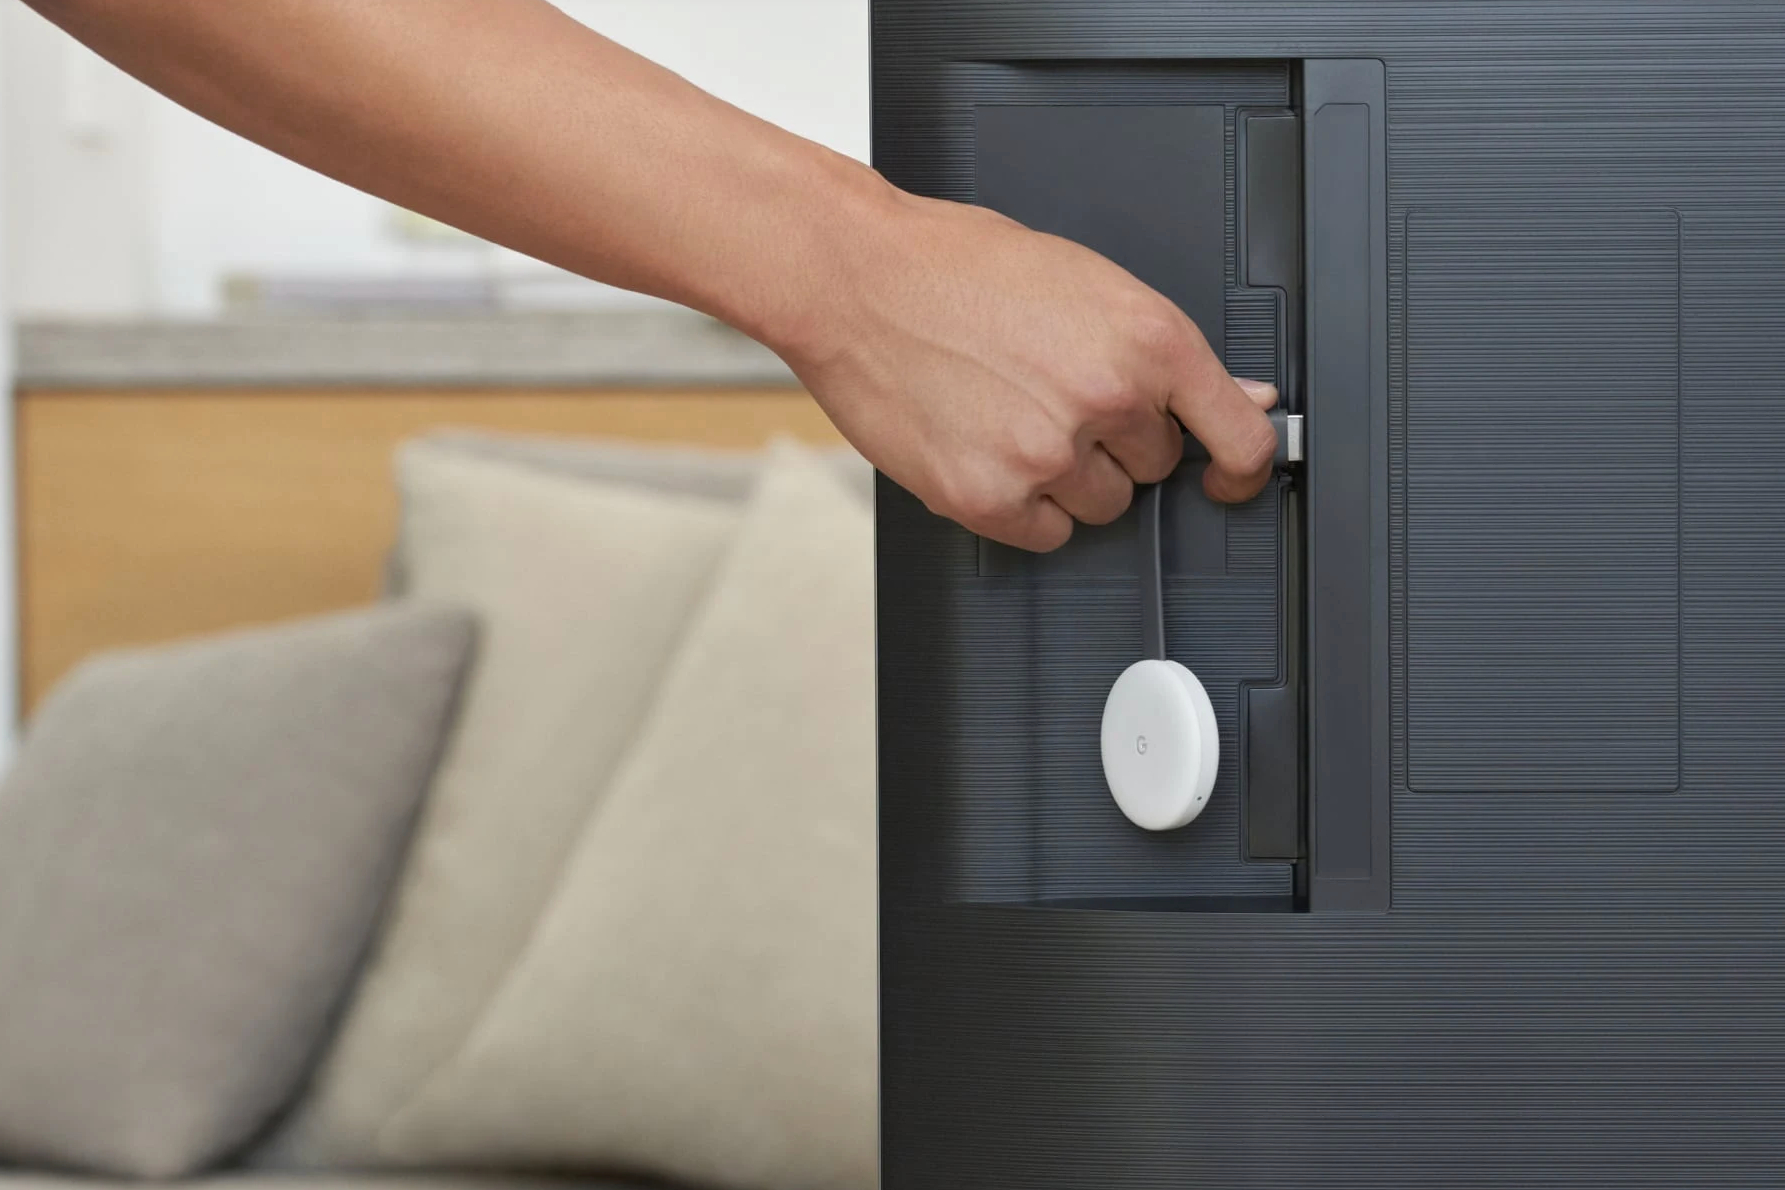 How to connect your Chromecast to a hotel | Digital Trends